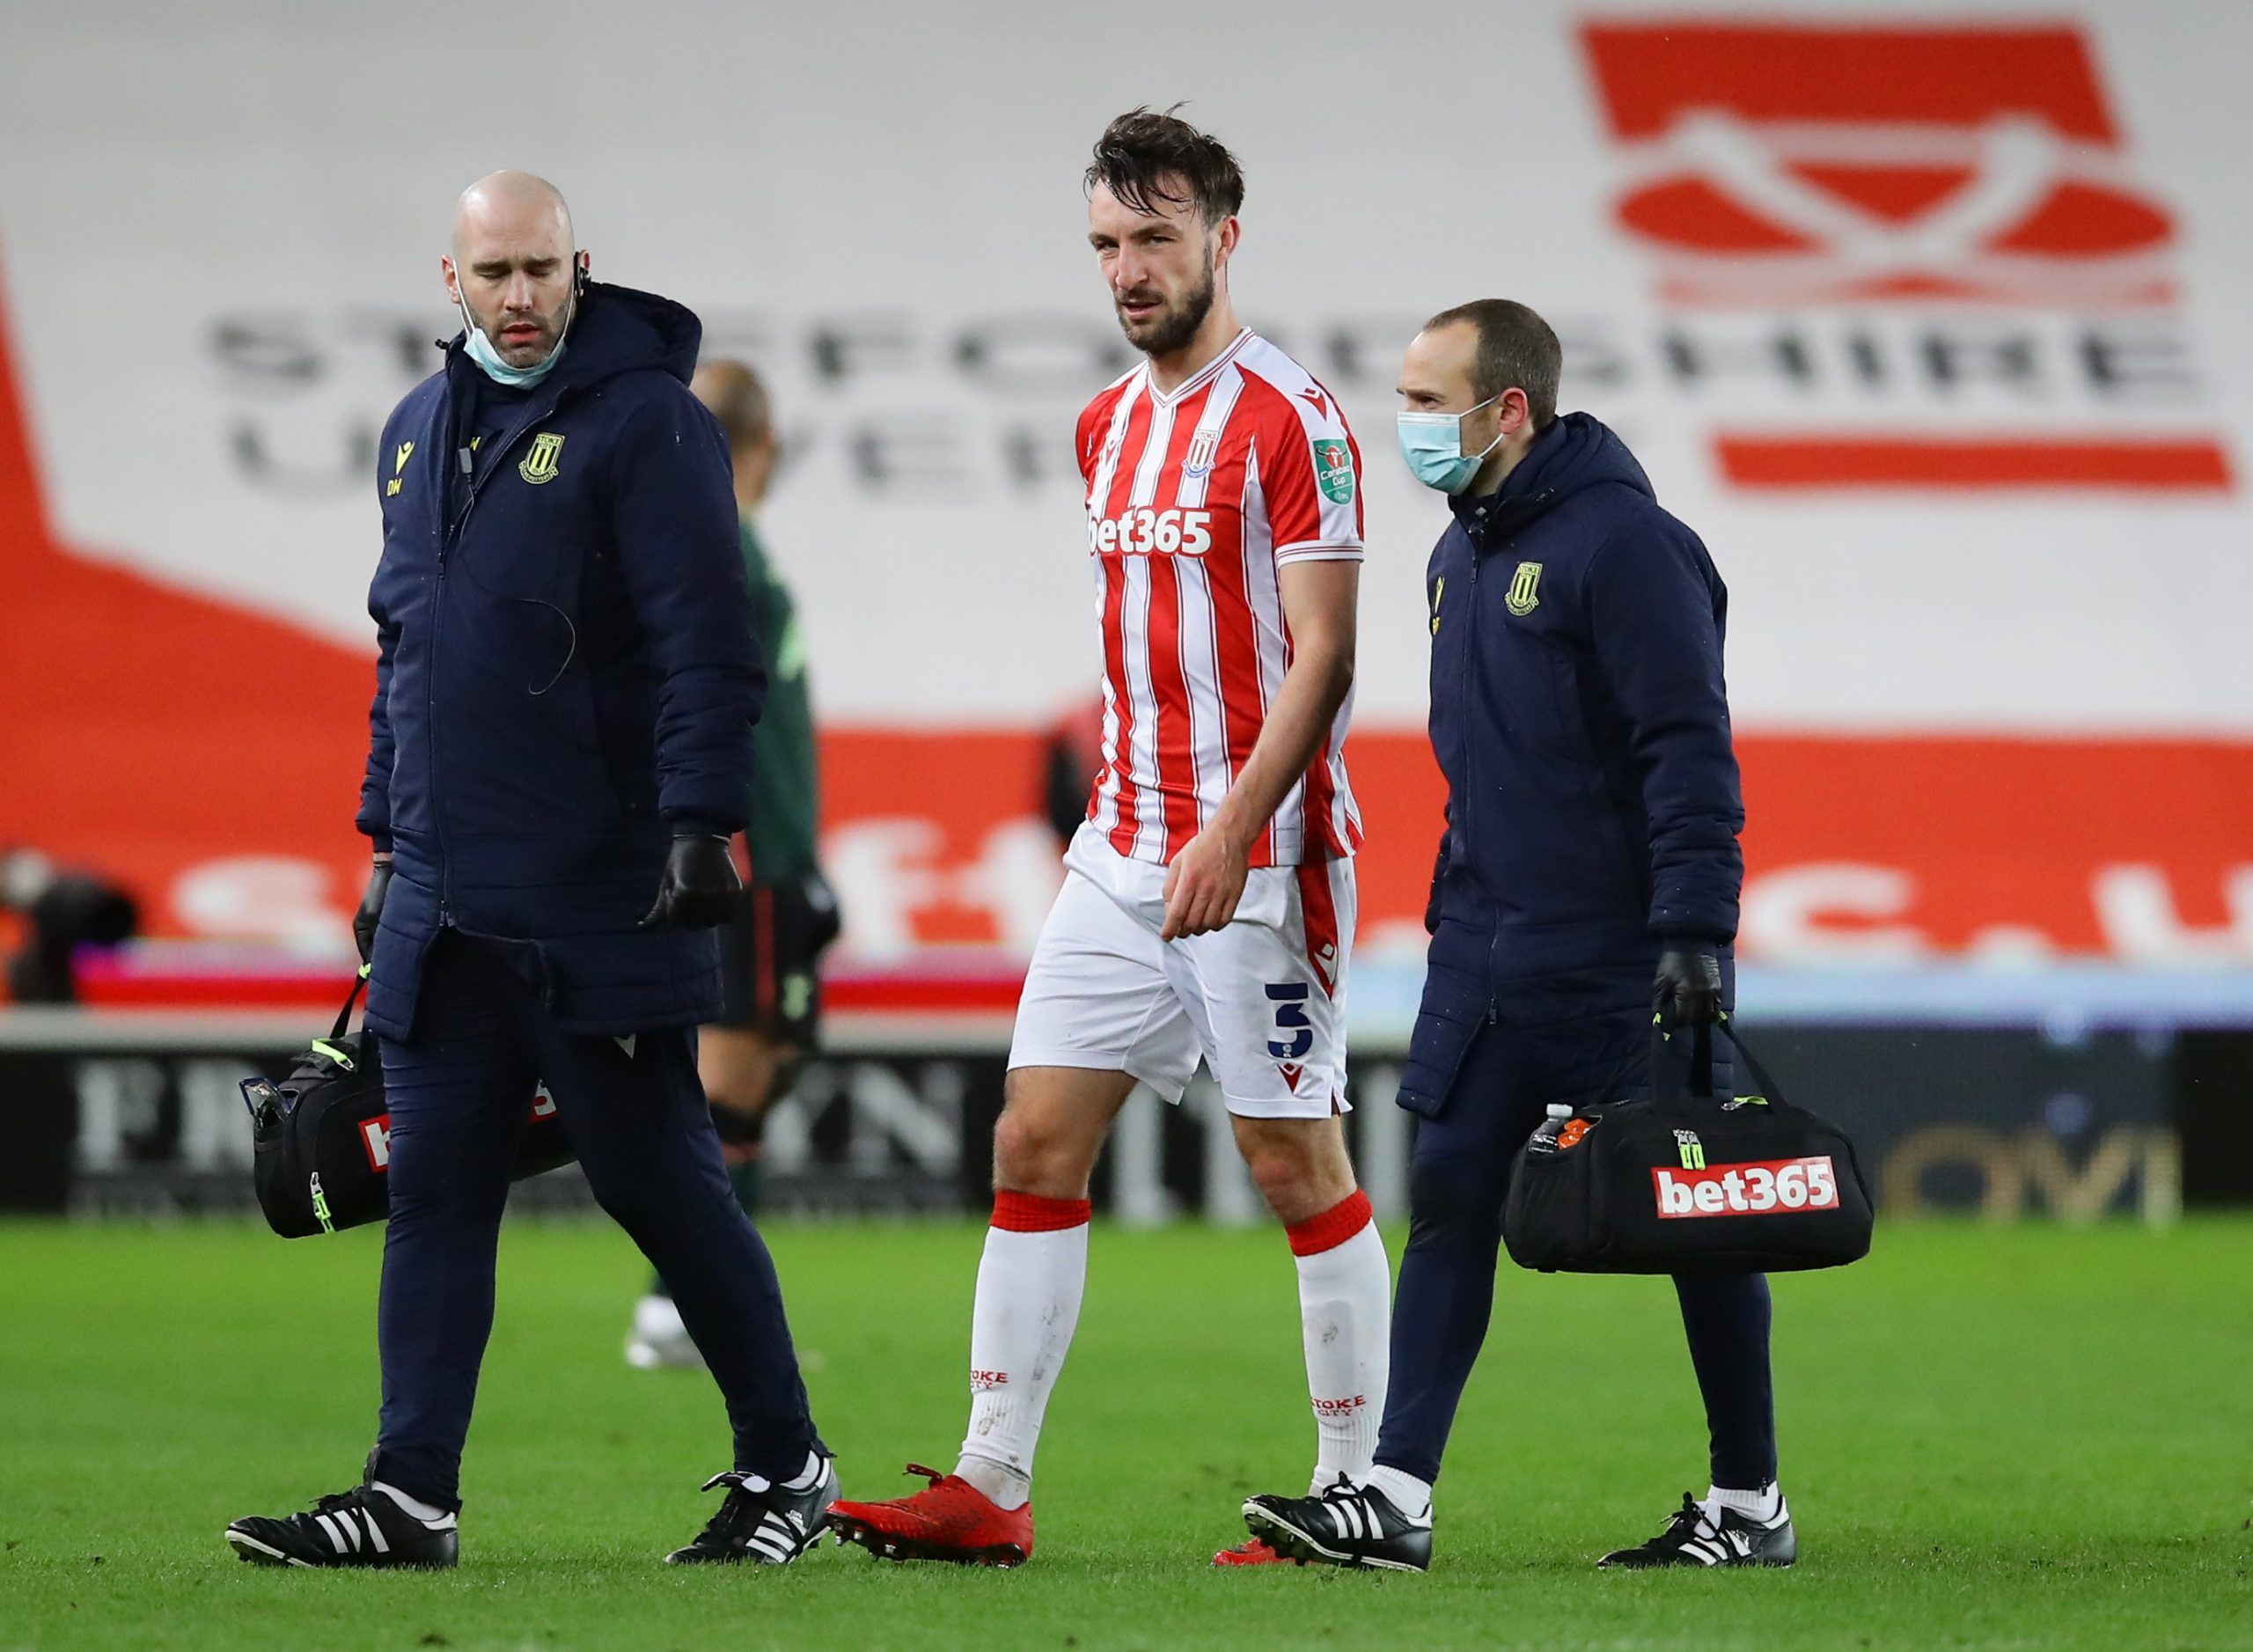 Soccer Football - Carabao Cup - Quarter-Final - Stoke City v Tottenham Hotspur - bet365 Stadium, Stoke-on-Trent, Britain - December 23, 2020 Stoke City's Morgan Fox walks off the pitch with medical staff after sustaining an injury REUTERS/David Klein EDITORIAL USE ONLY. No use with unauthorized audio, video, data, fixture lists, club/league logos or 'live' services. Online in-match use limited to 75 images, no video emulation. No use in betting, games or single club /league/player publications. 